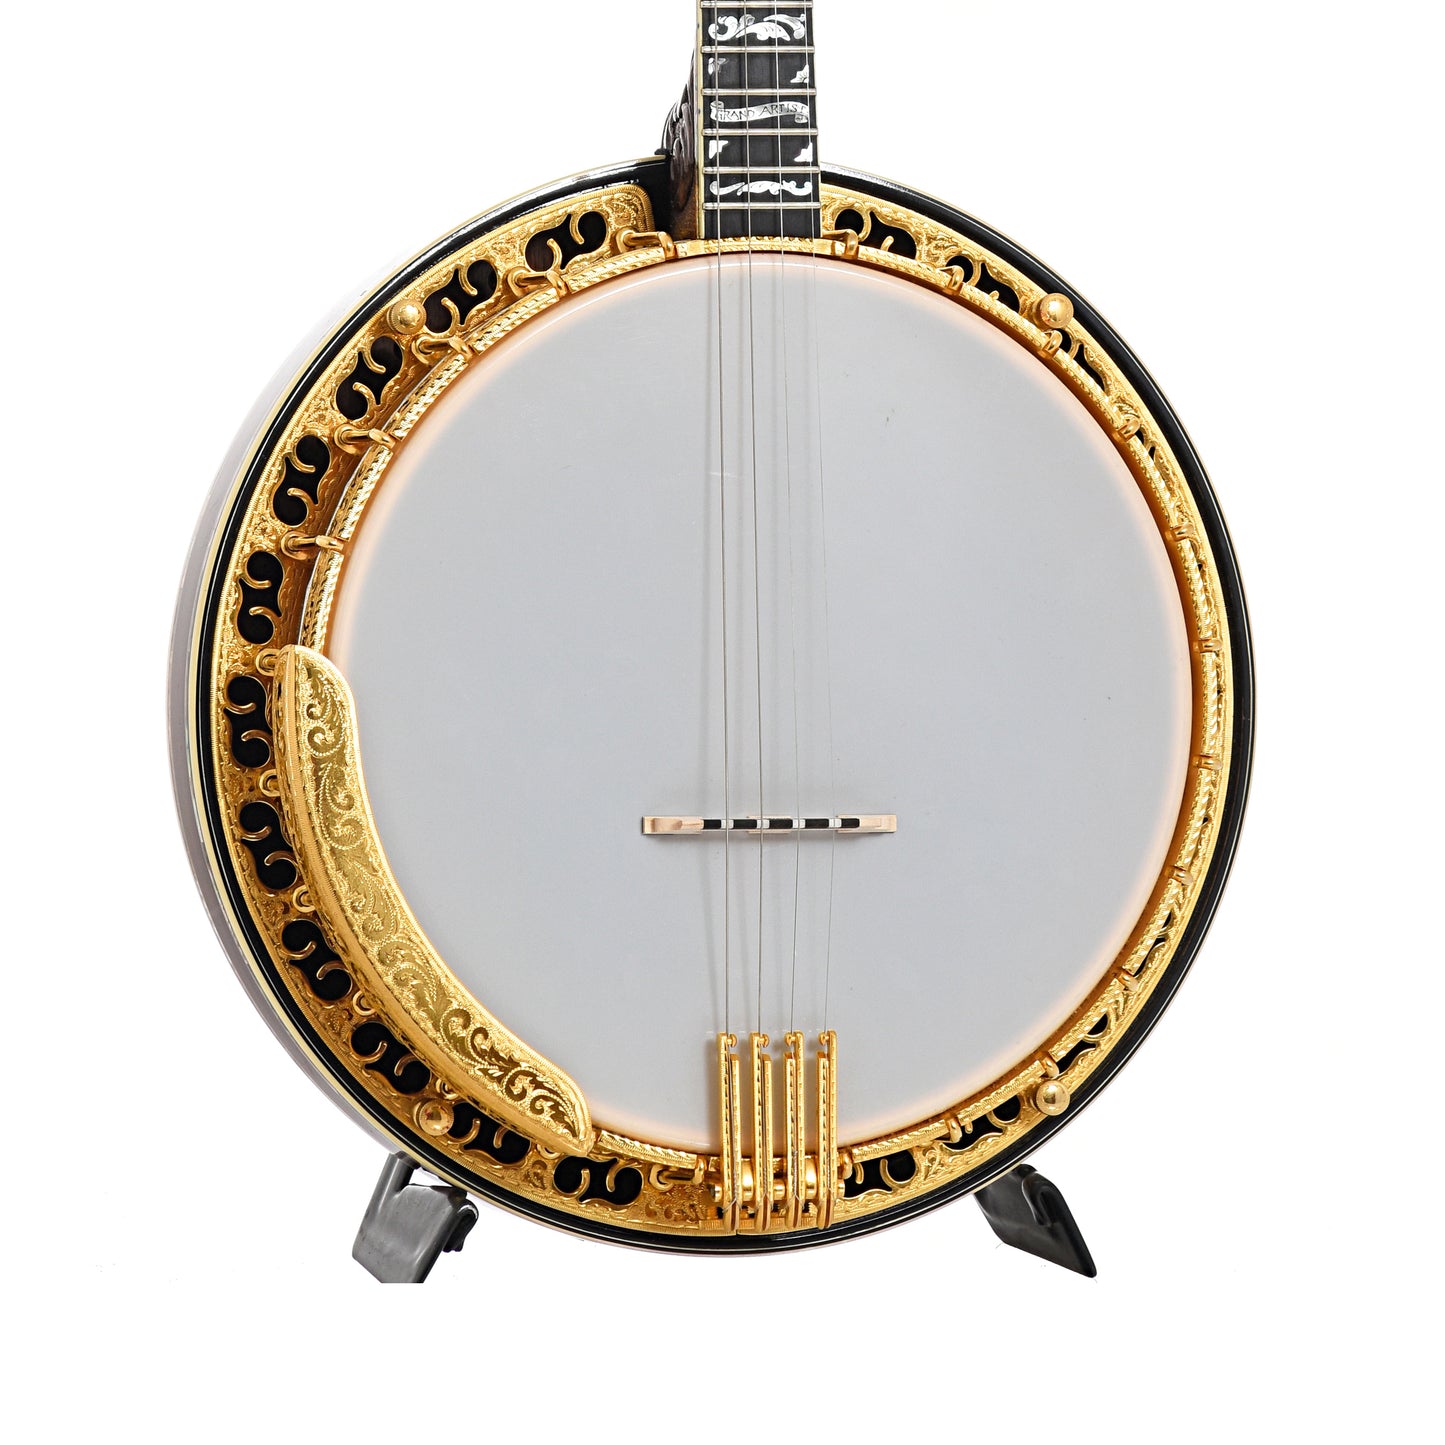 Front and side of Ome Grand Artist Tenor Banjo